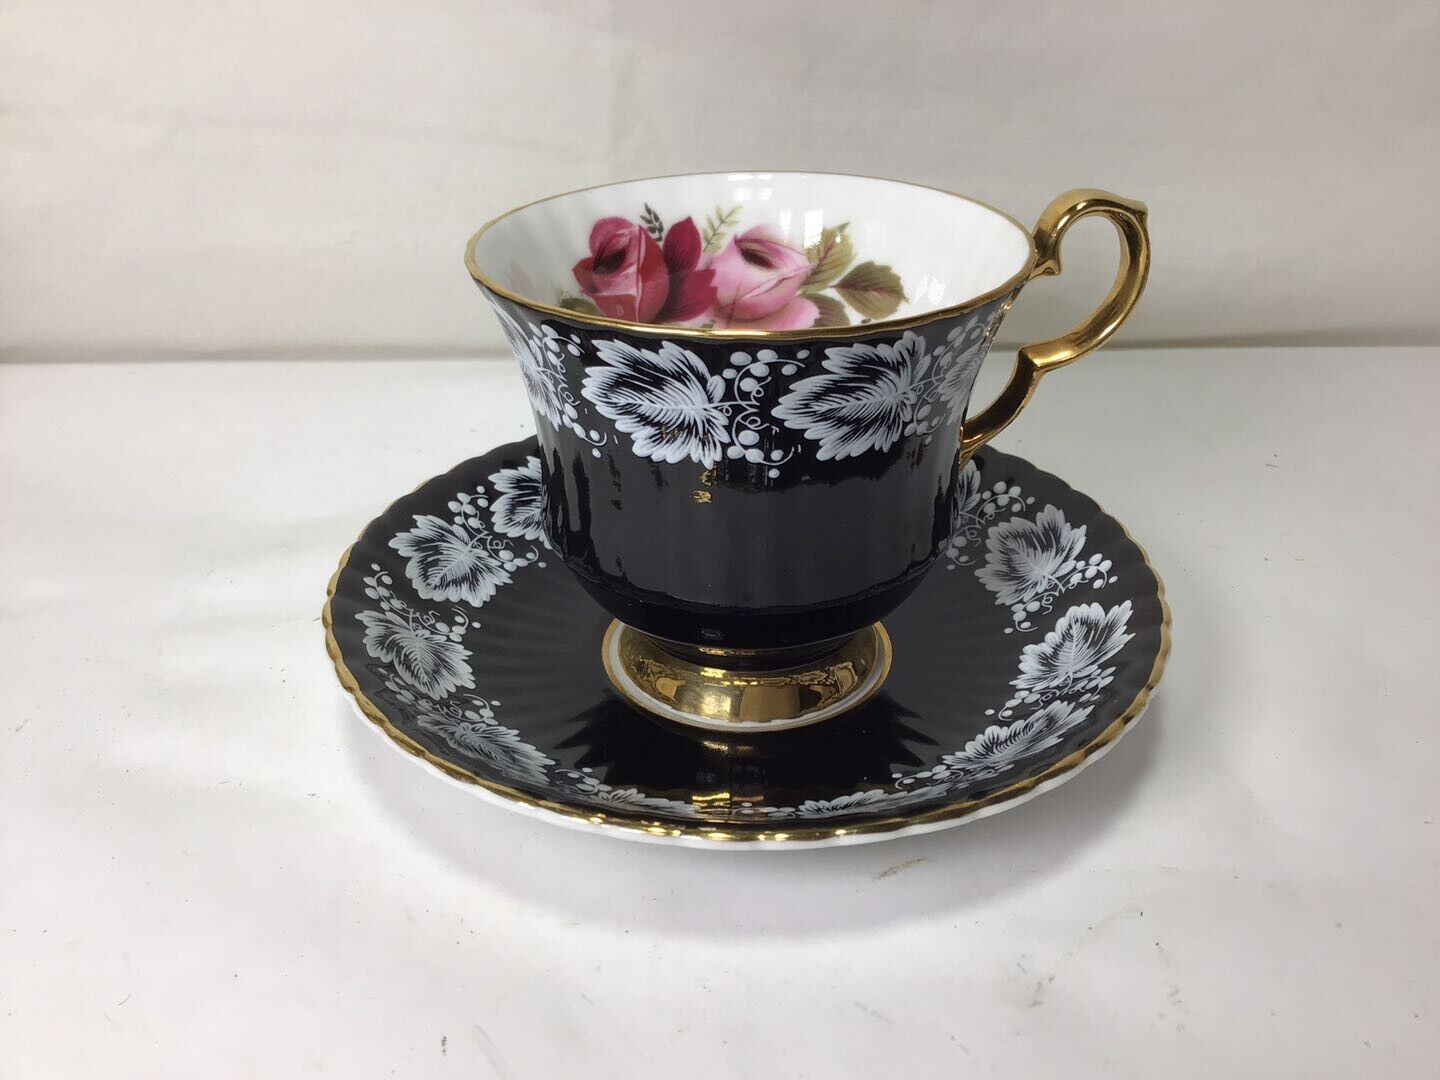 Y43 Vintage Society Cup And Saucer - Black, White & Gold With White Relief